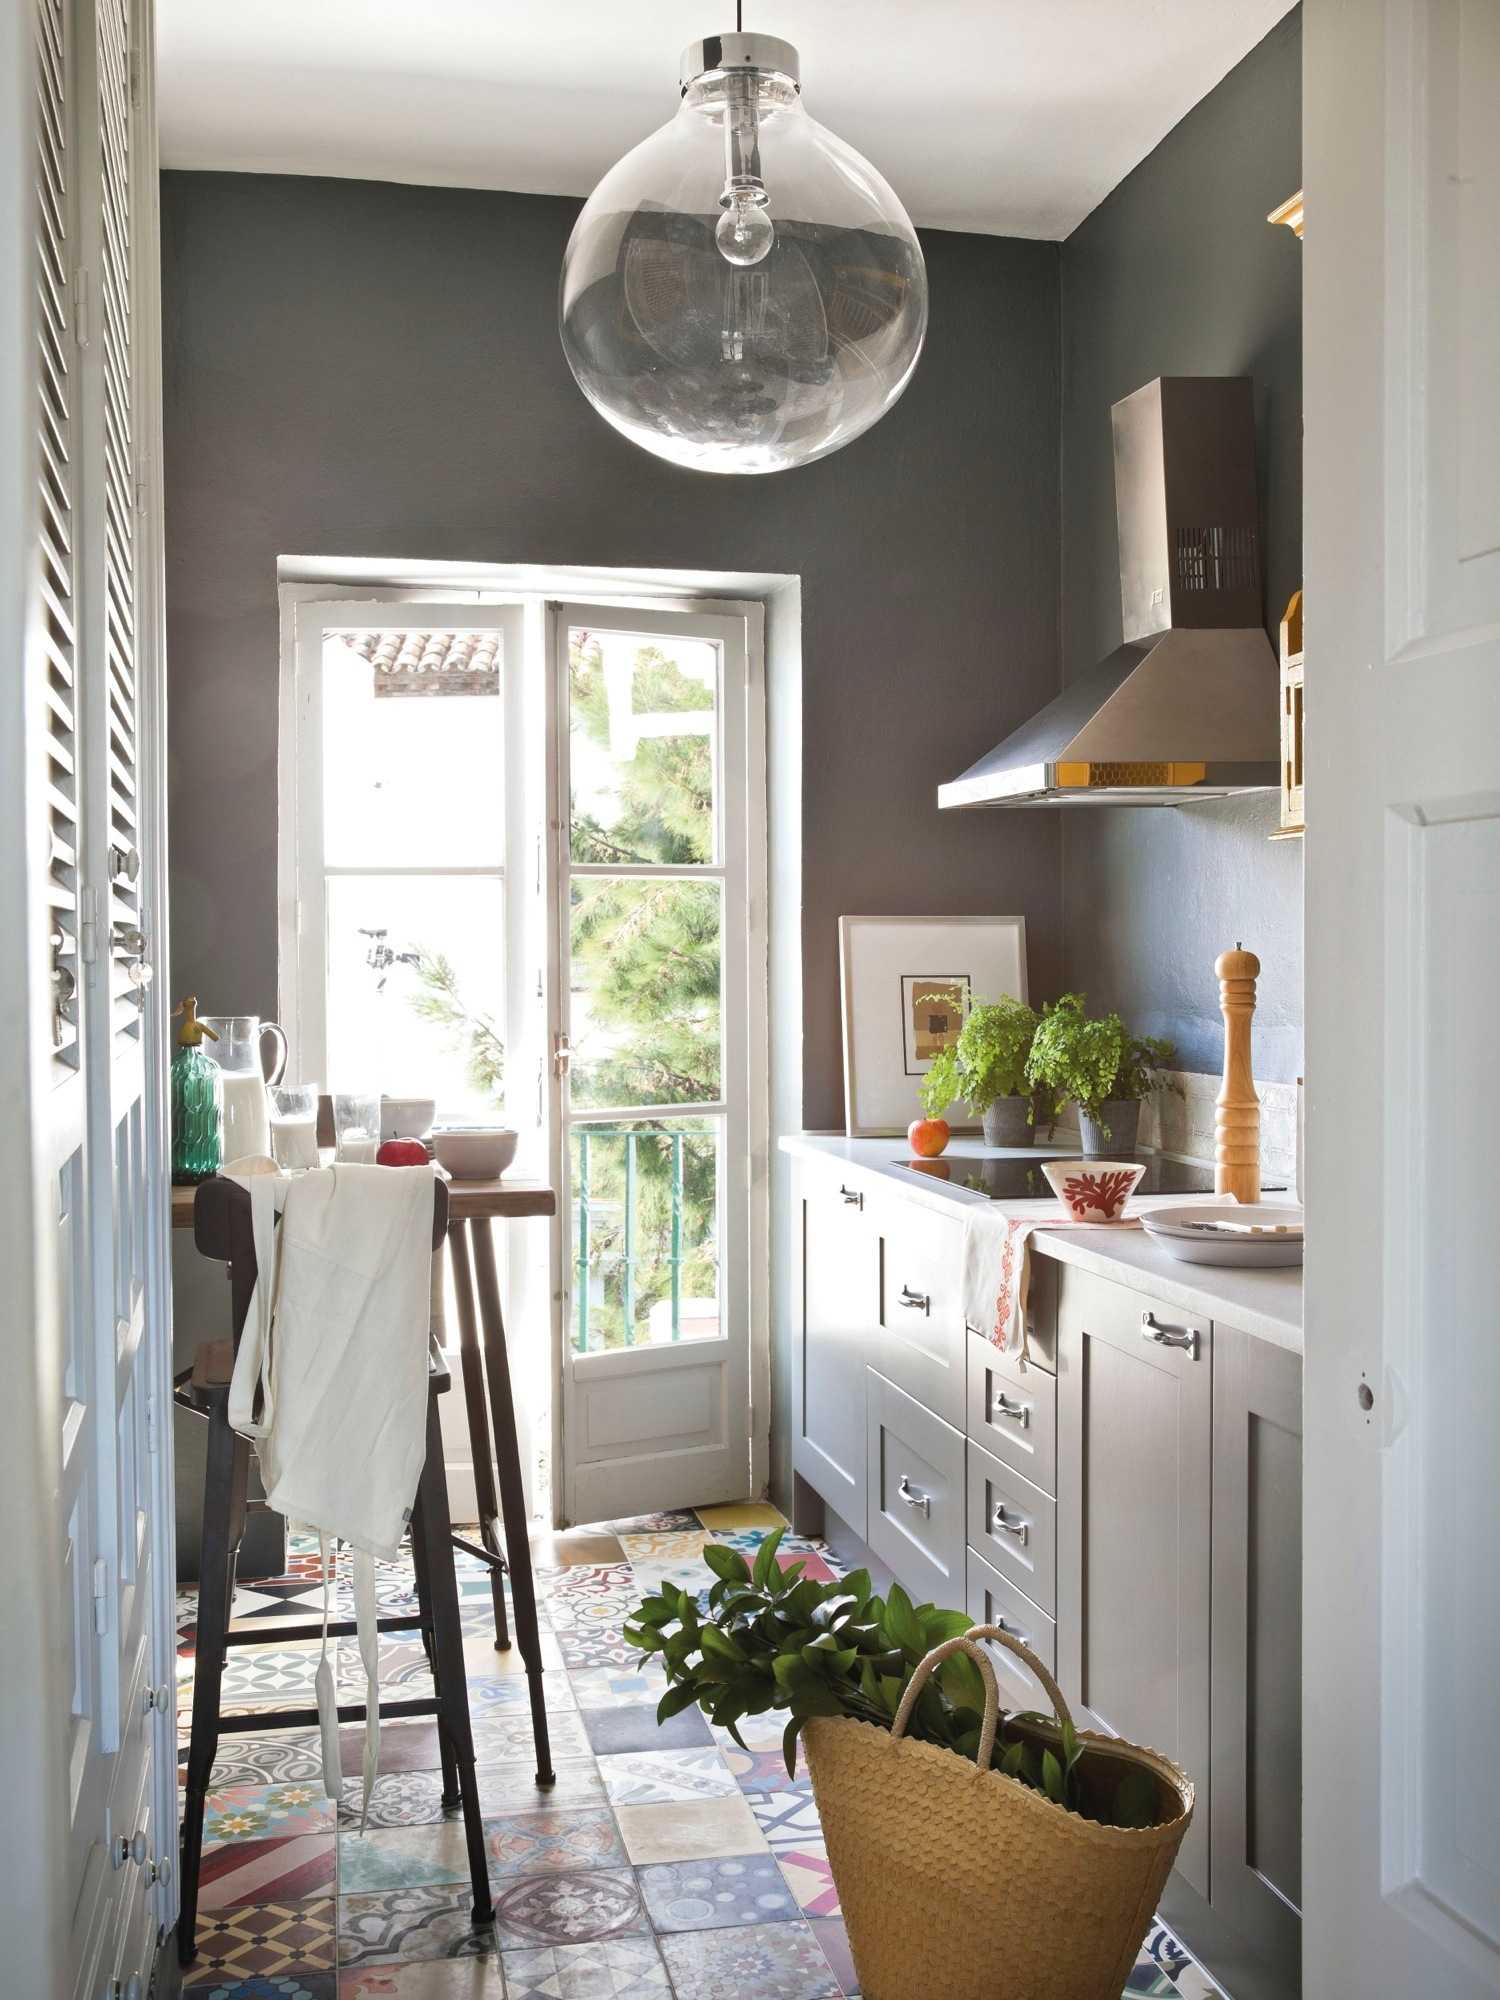 Paint your kitchen gray